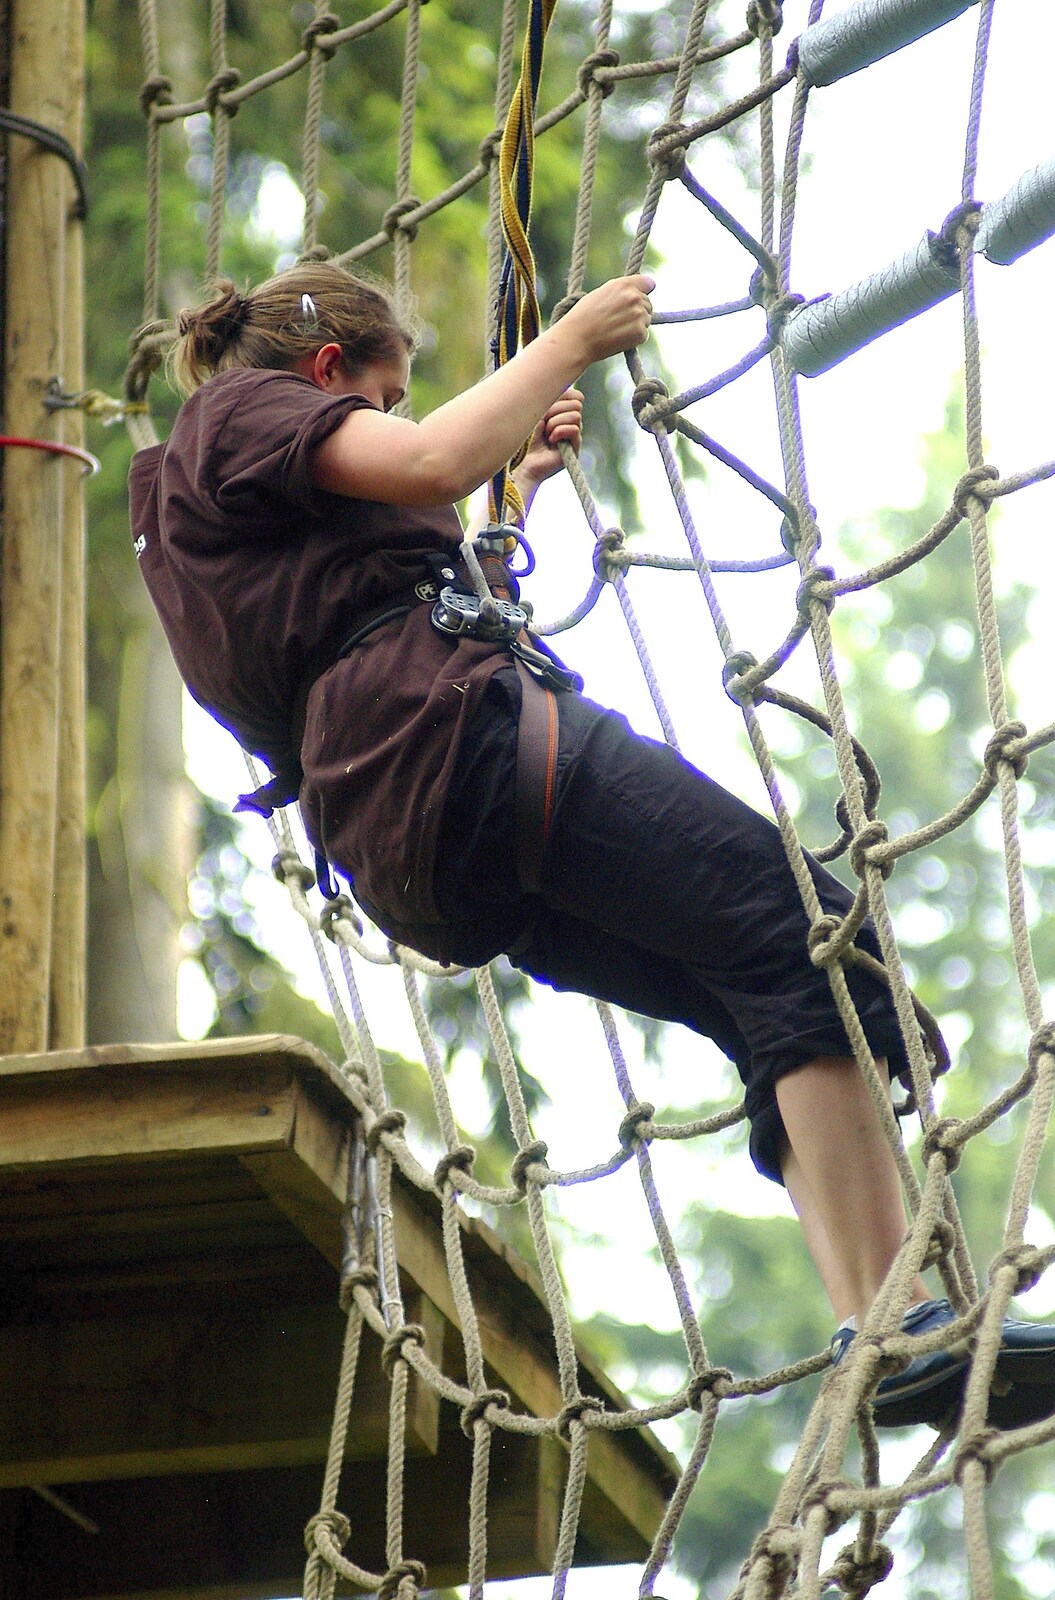 Isobel makes it into the cargo net from Qualcomm Cambridge "Go Ape", High Lodge, Thetford Forest - 27th July 2006